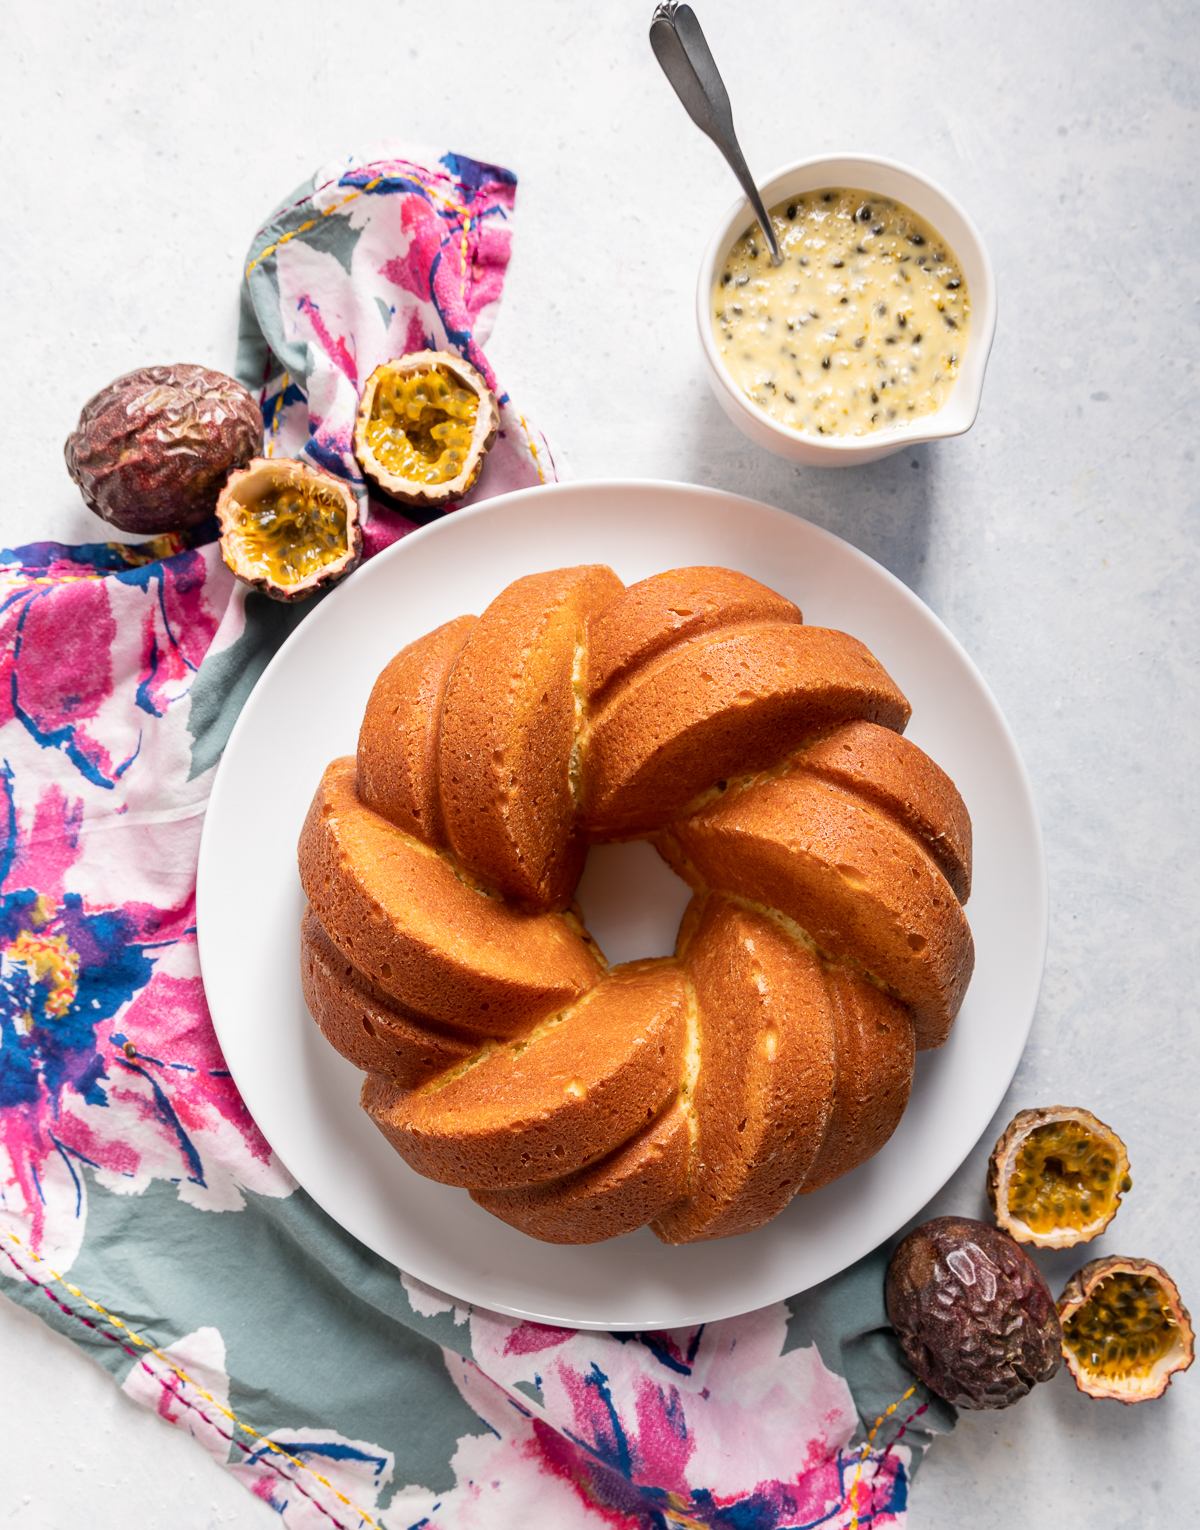 golden yellow braided bundt cake on a white plate blue and pink flower napkin whole and halved passionfruits bowl of passionfruit icing